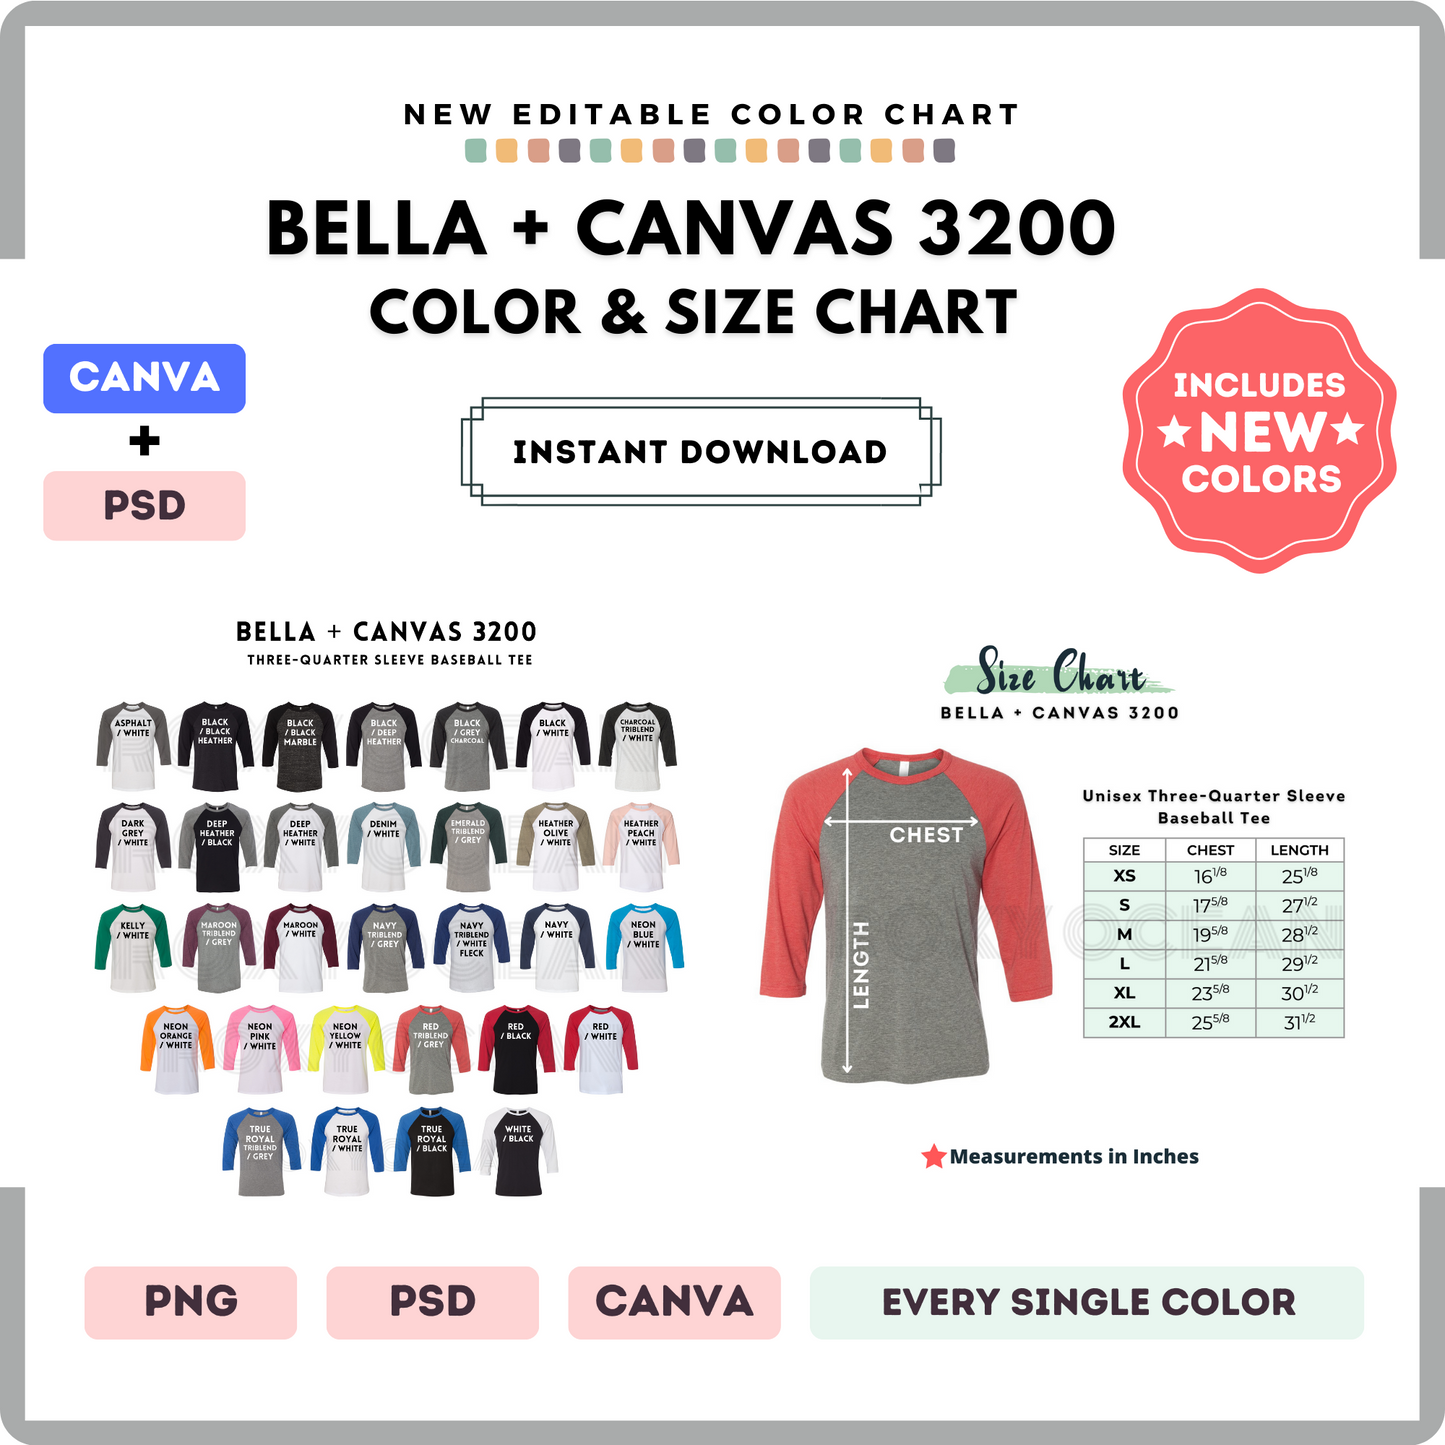 Bella Canvas 3200 Color and Size Chart